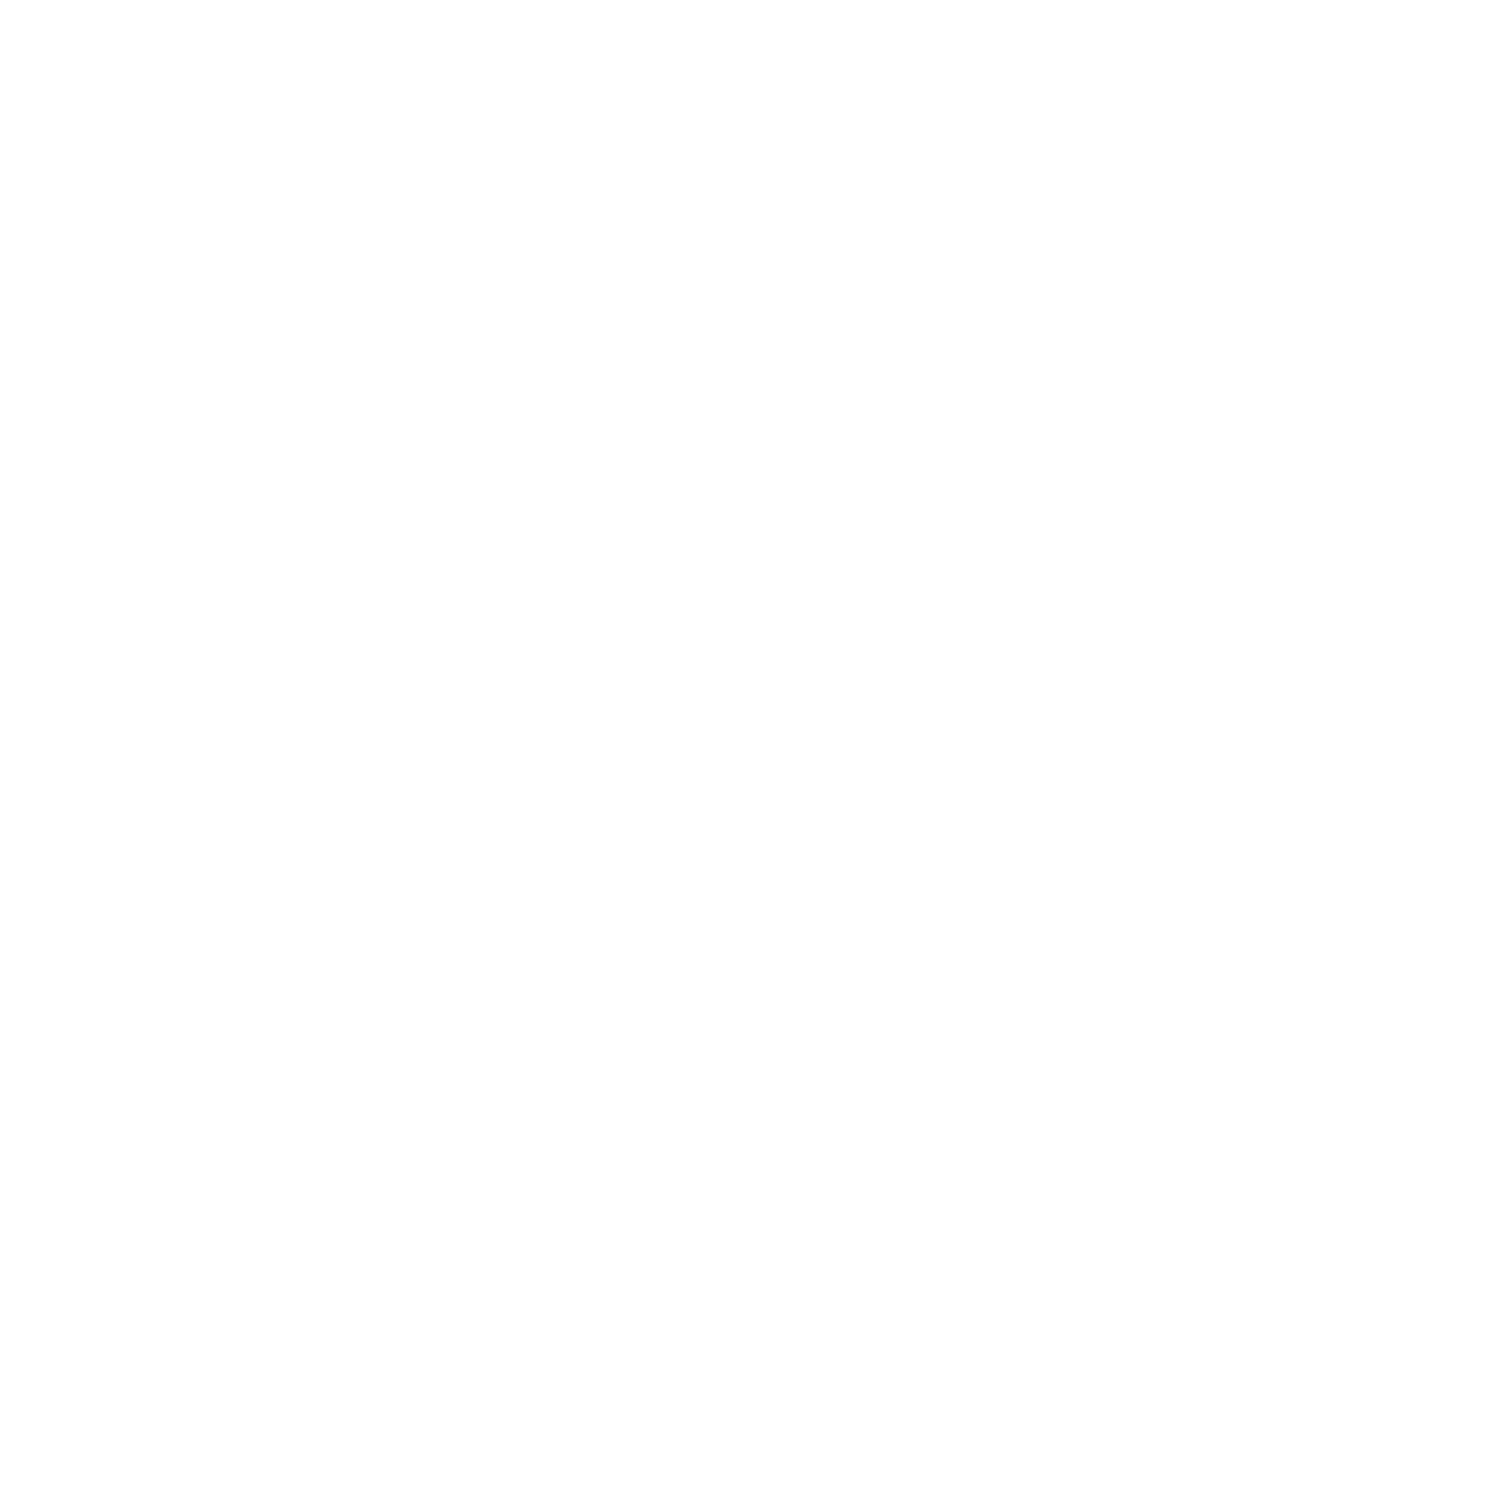 The Works Cycle